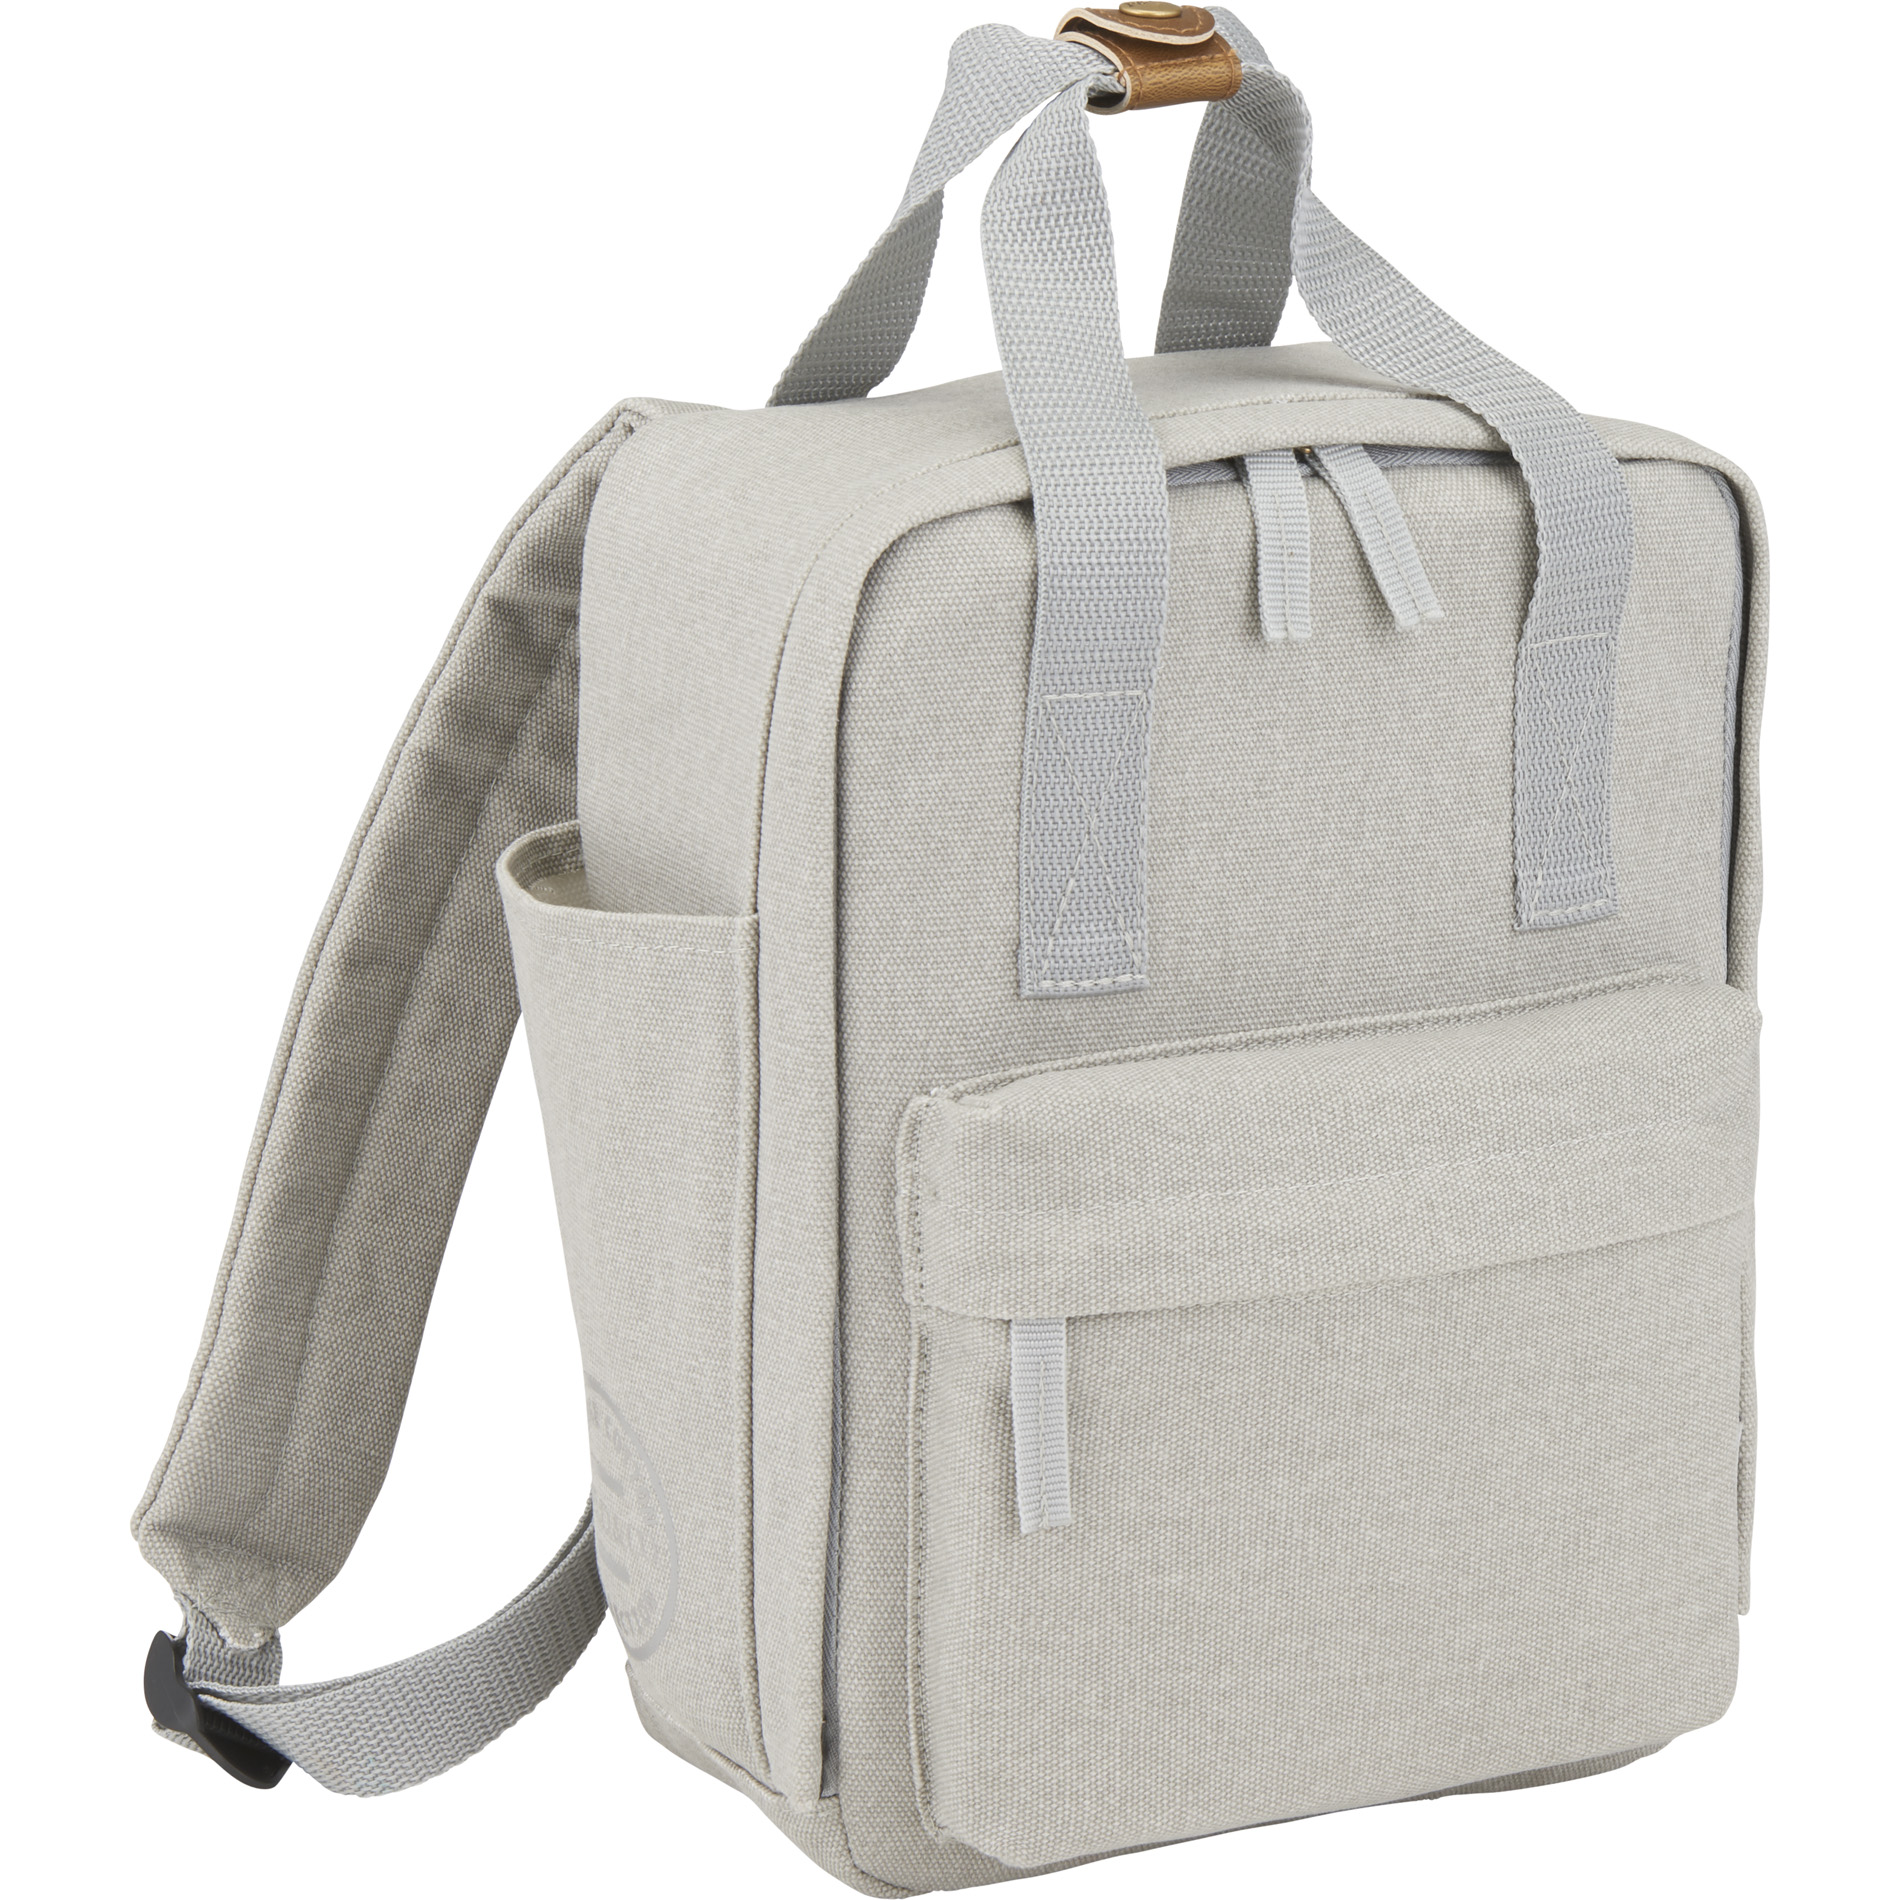 Field & Co 7950-34 - Mini Campus Backpack